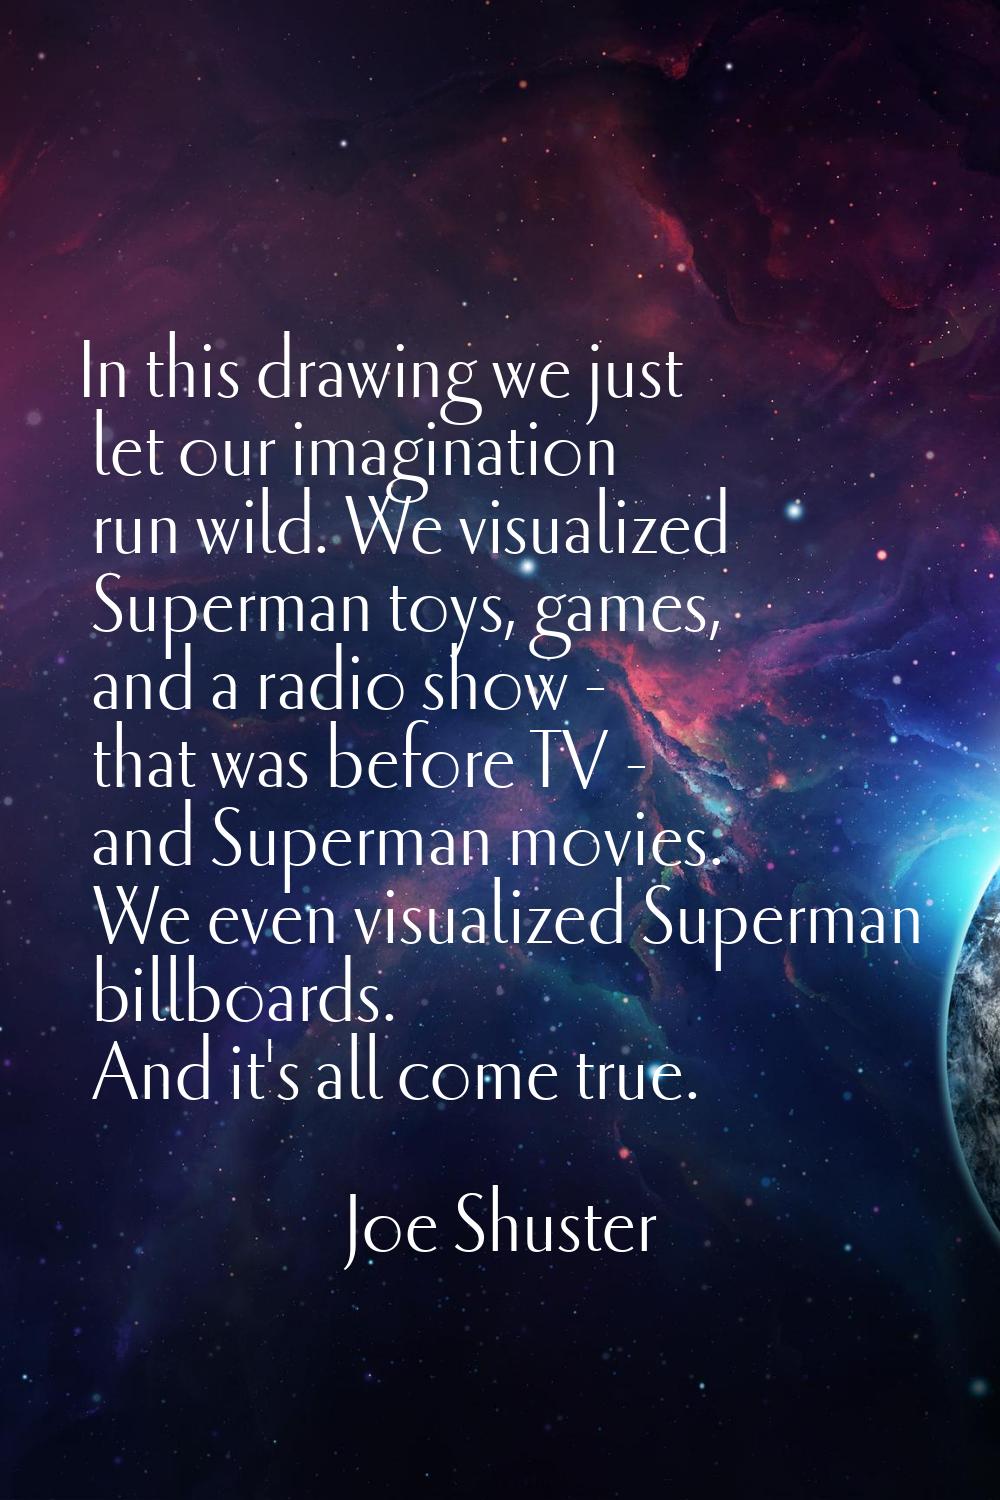 In this drawing we just let our imagination run wild. We visualized Superman toys, games, and a rad